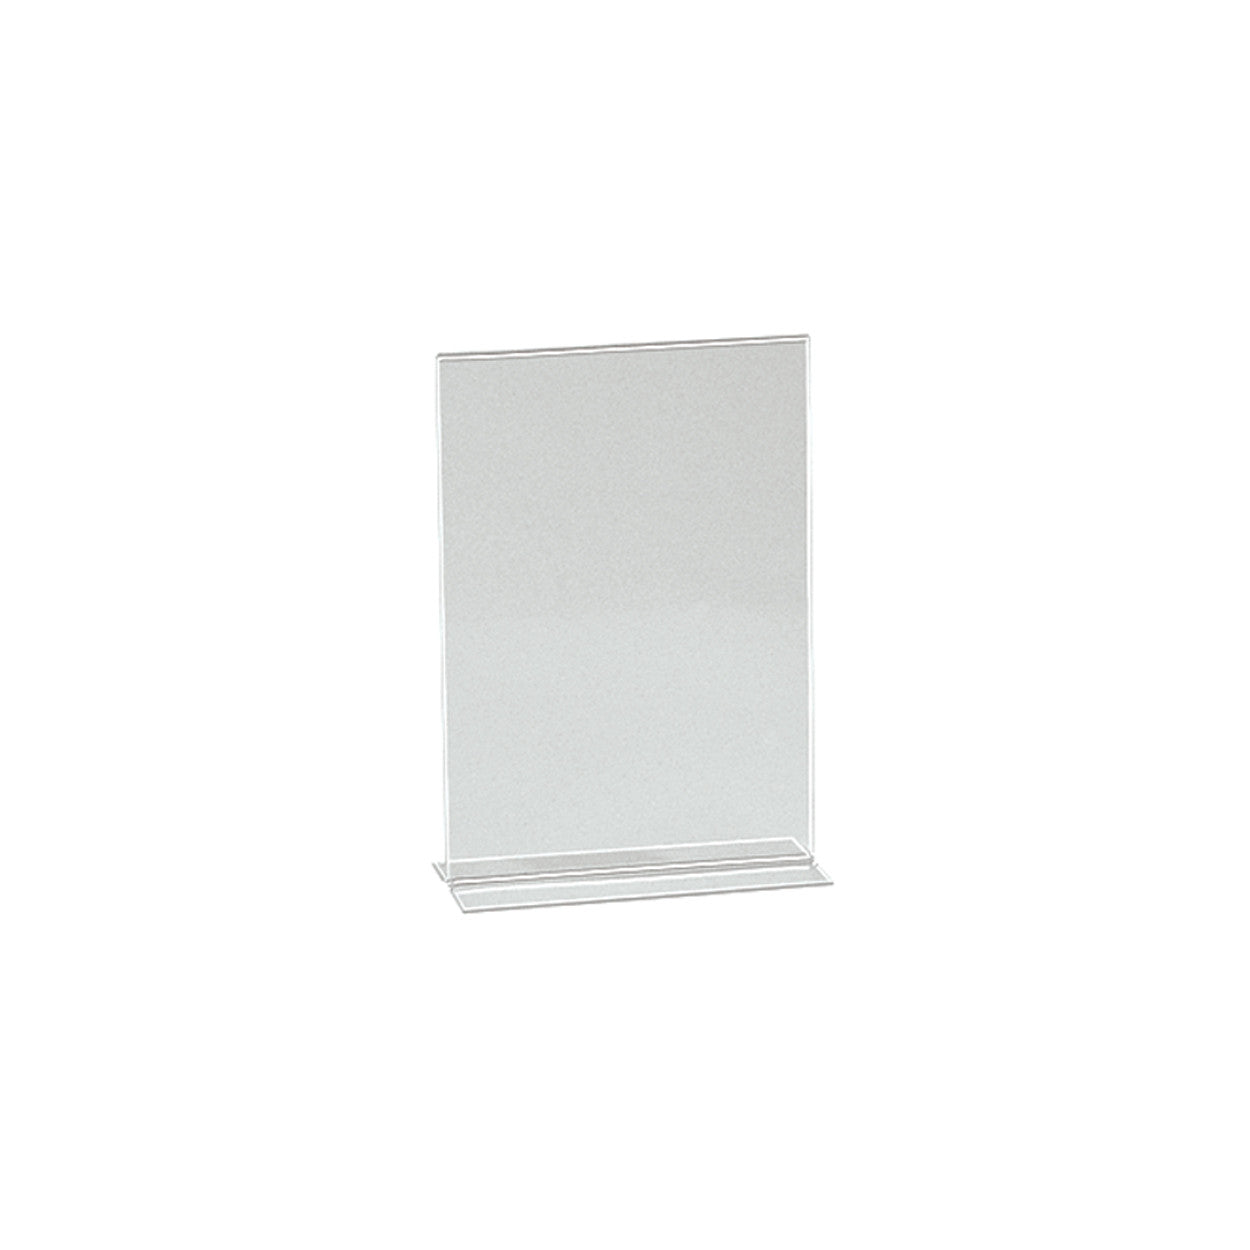 Double Sided Acrylic A6 Portrait Sign Holder - D70 Base